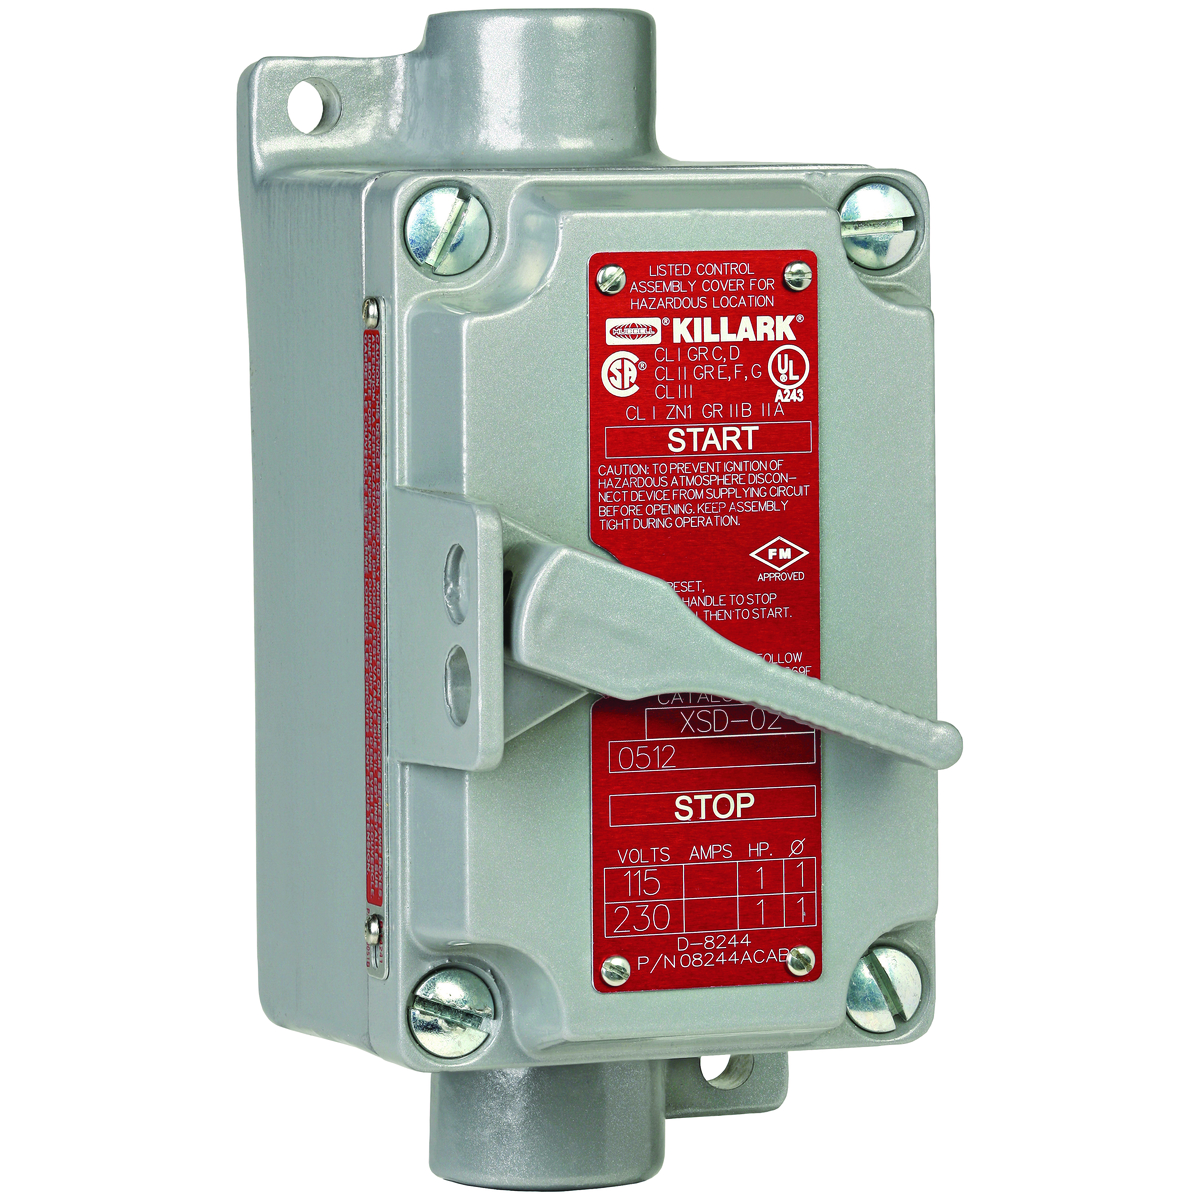 XSD SERIES - ALUMINUM DEAD-END SINGLE GANG 2-POLE, SINGLE PHASE MANUALMOTOR STARTING SWITCH UNIT - WITH OVERLOAD PROTECTION - HUB SIZE 1/2INCH